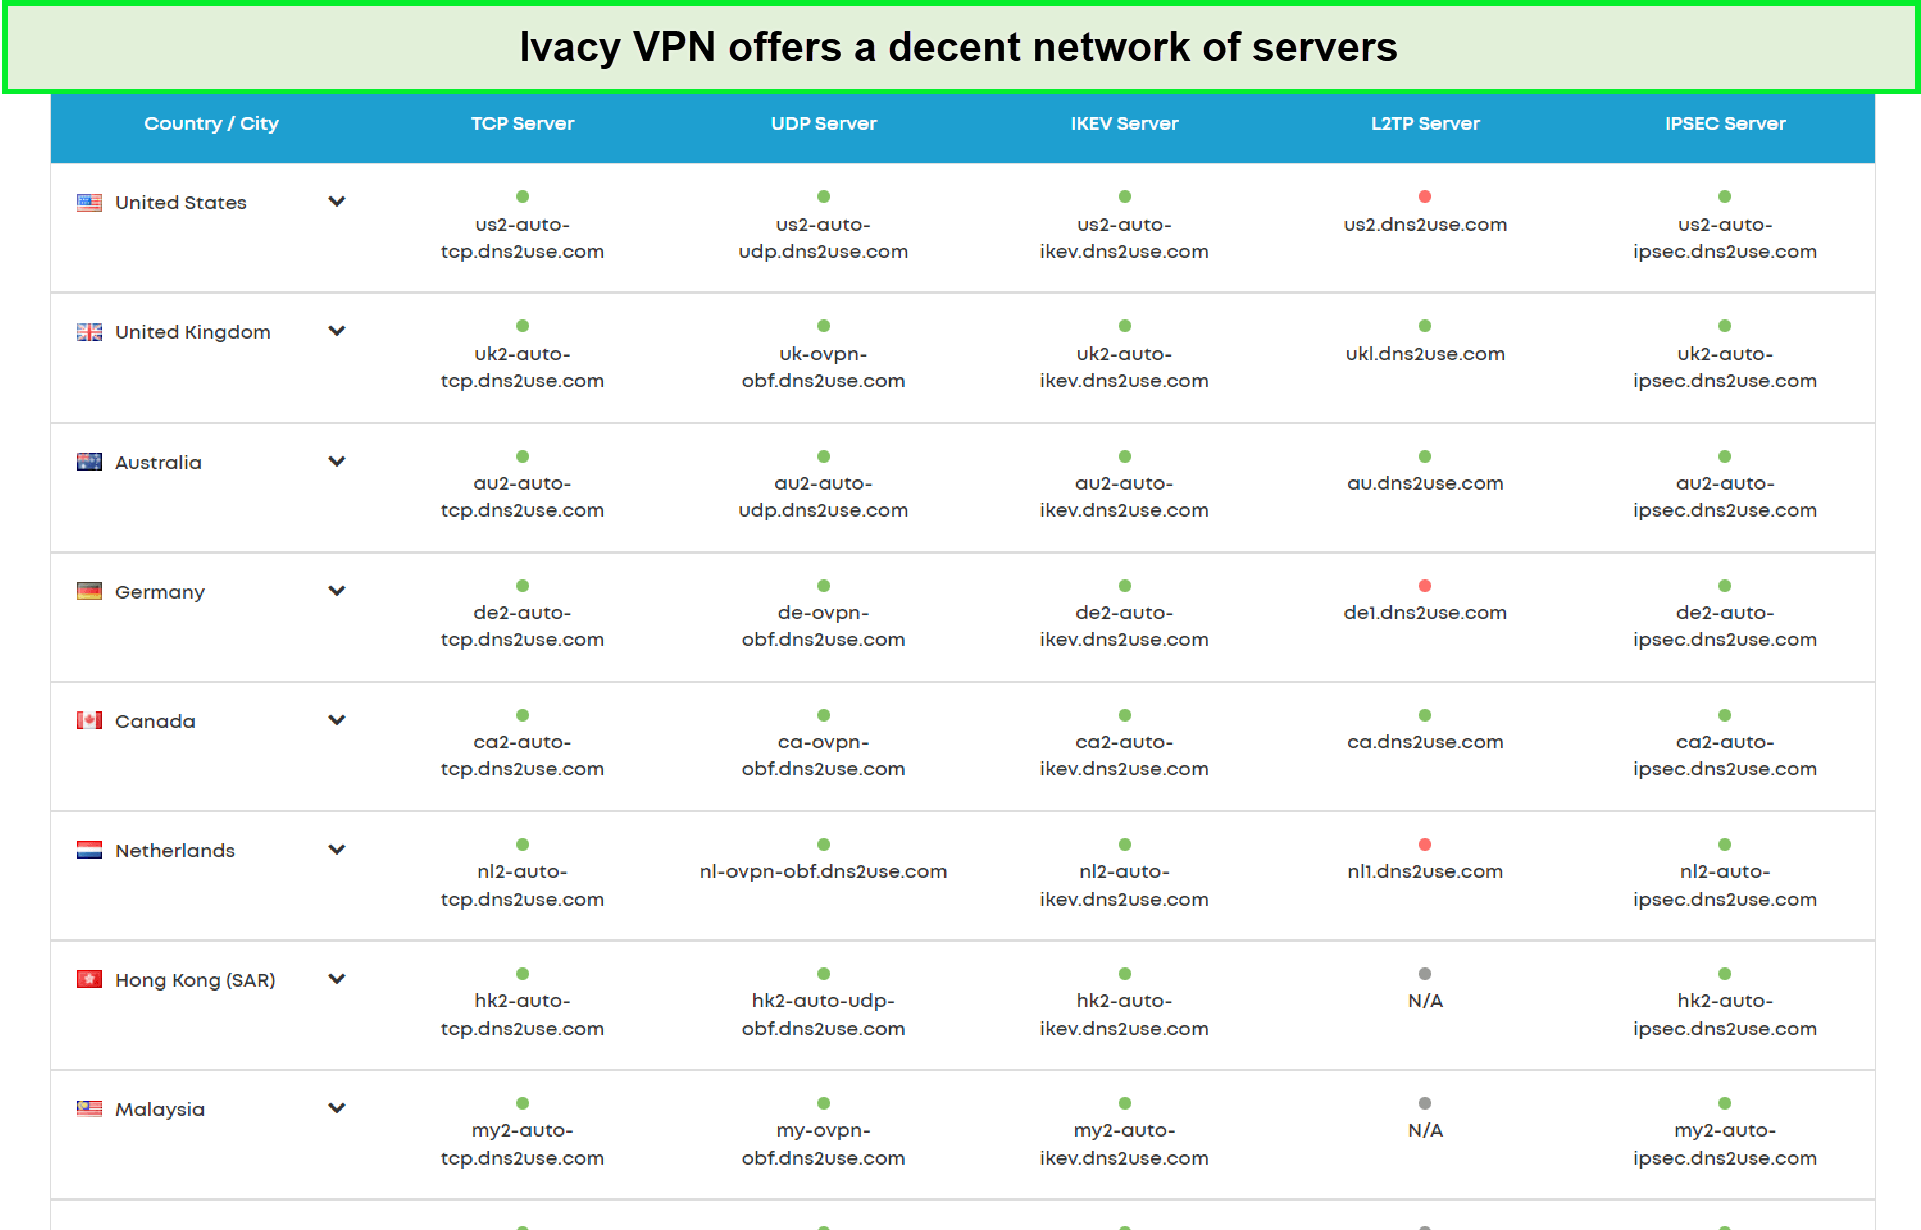 ivacy-server-network-in-South Korea